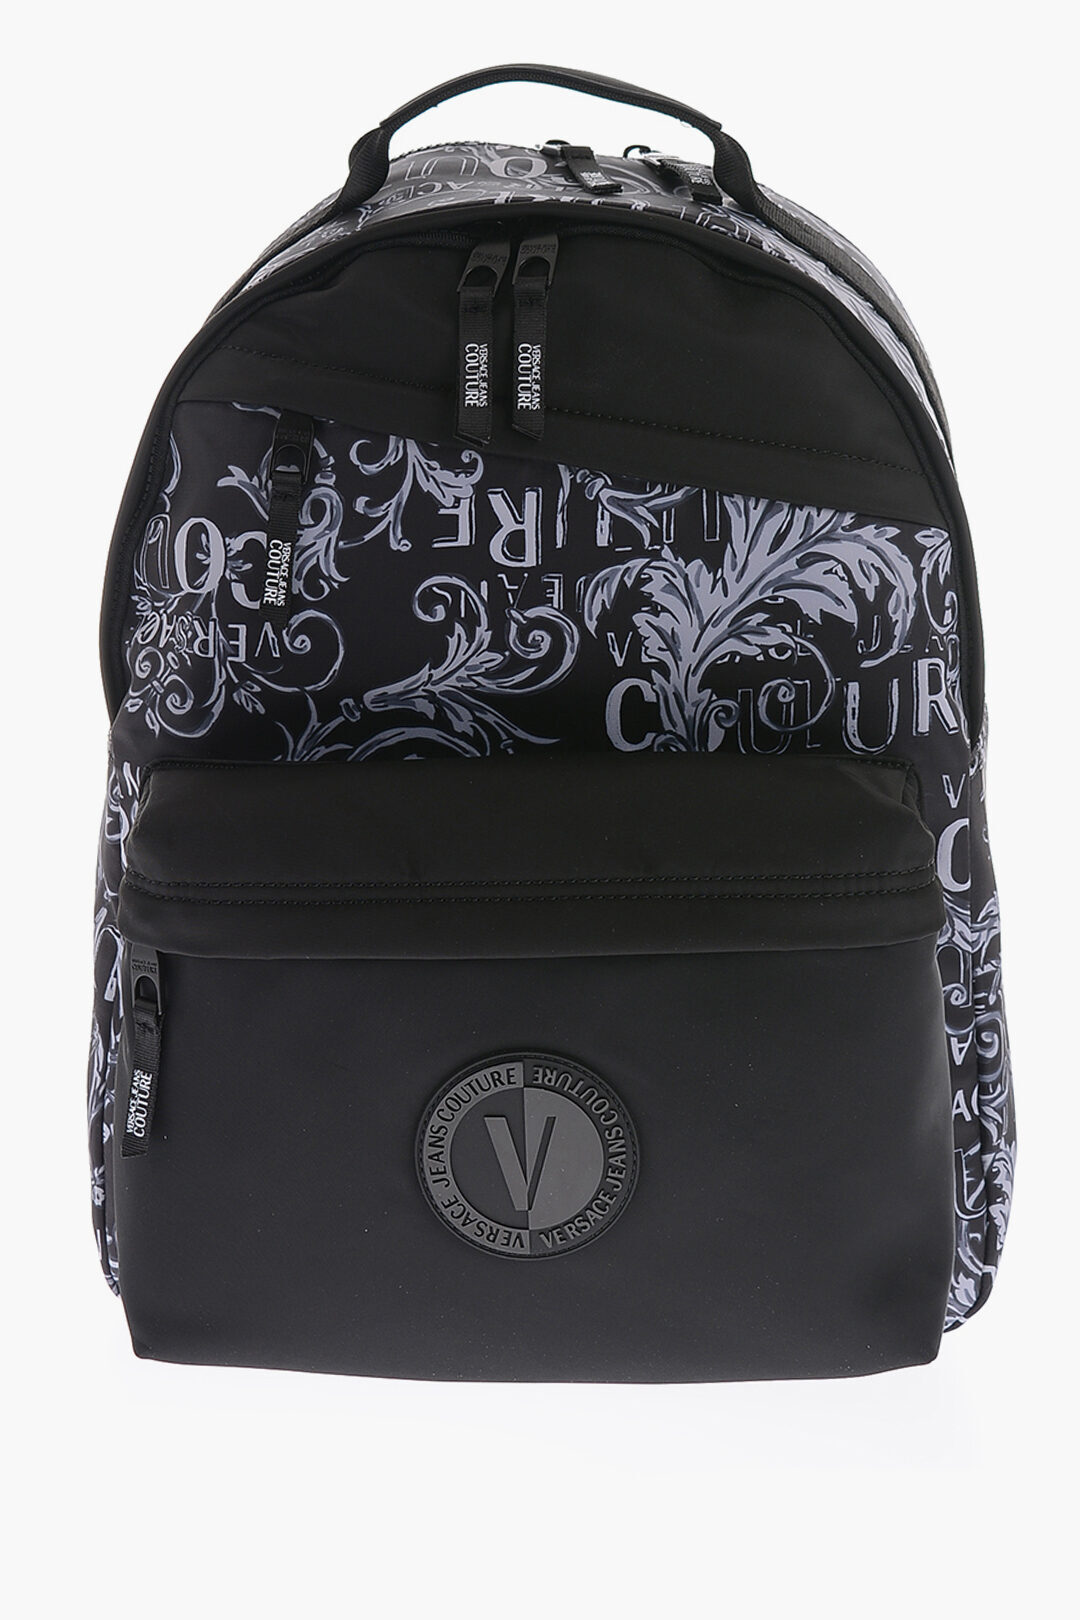 VERSACE ヴェルサーチ バックパック 74YA4B70 ZS588 PV3 メンズ JEANS COUTURE BAROQUE PATTERNED FABRIC BACKPACK 【関税 送料無料】【ラッピング無料】 dk